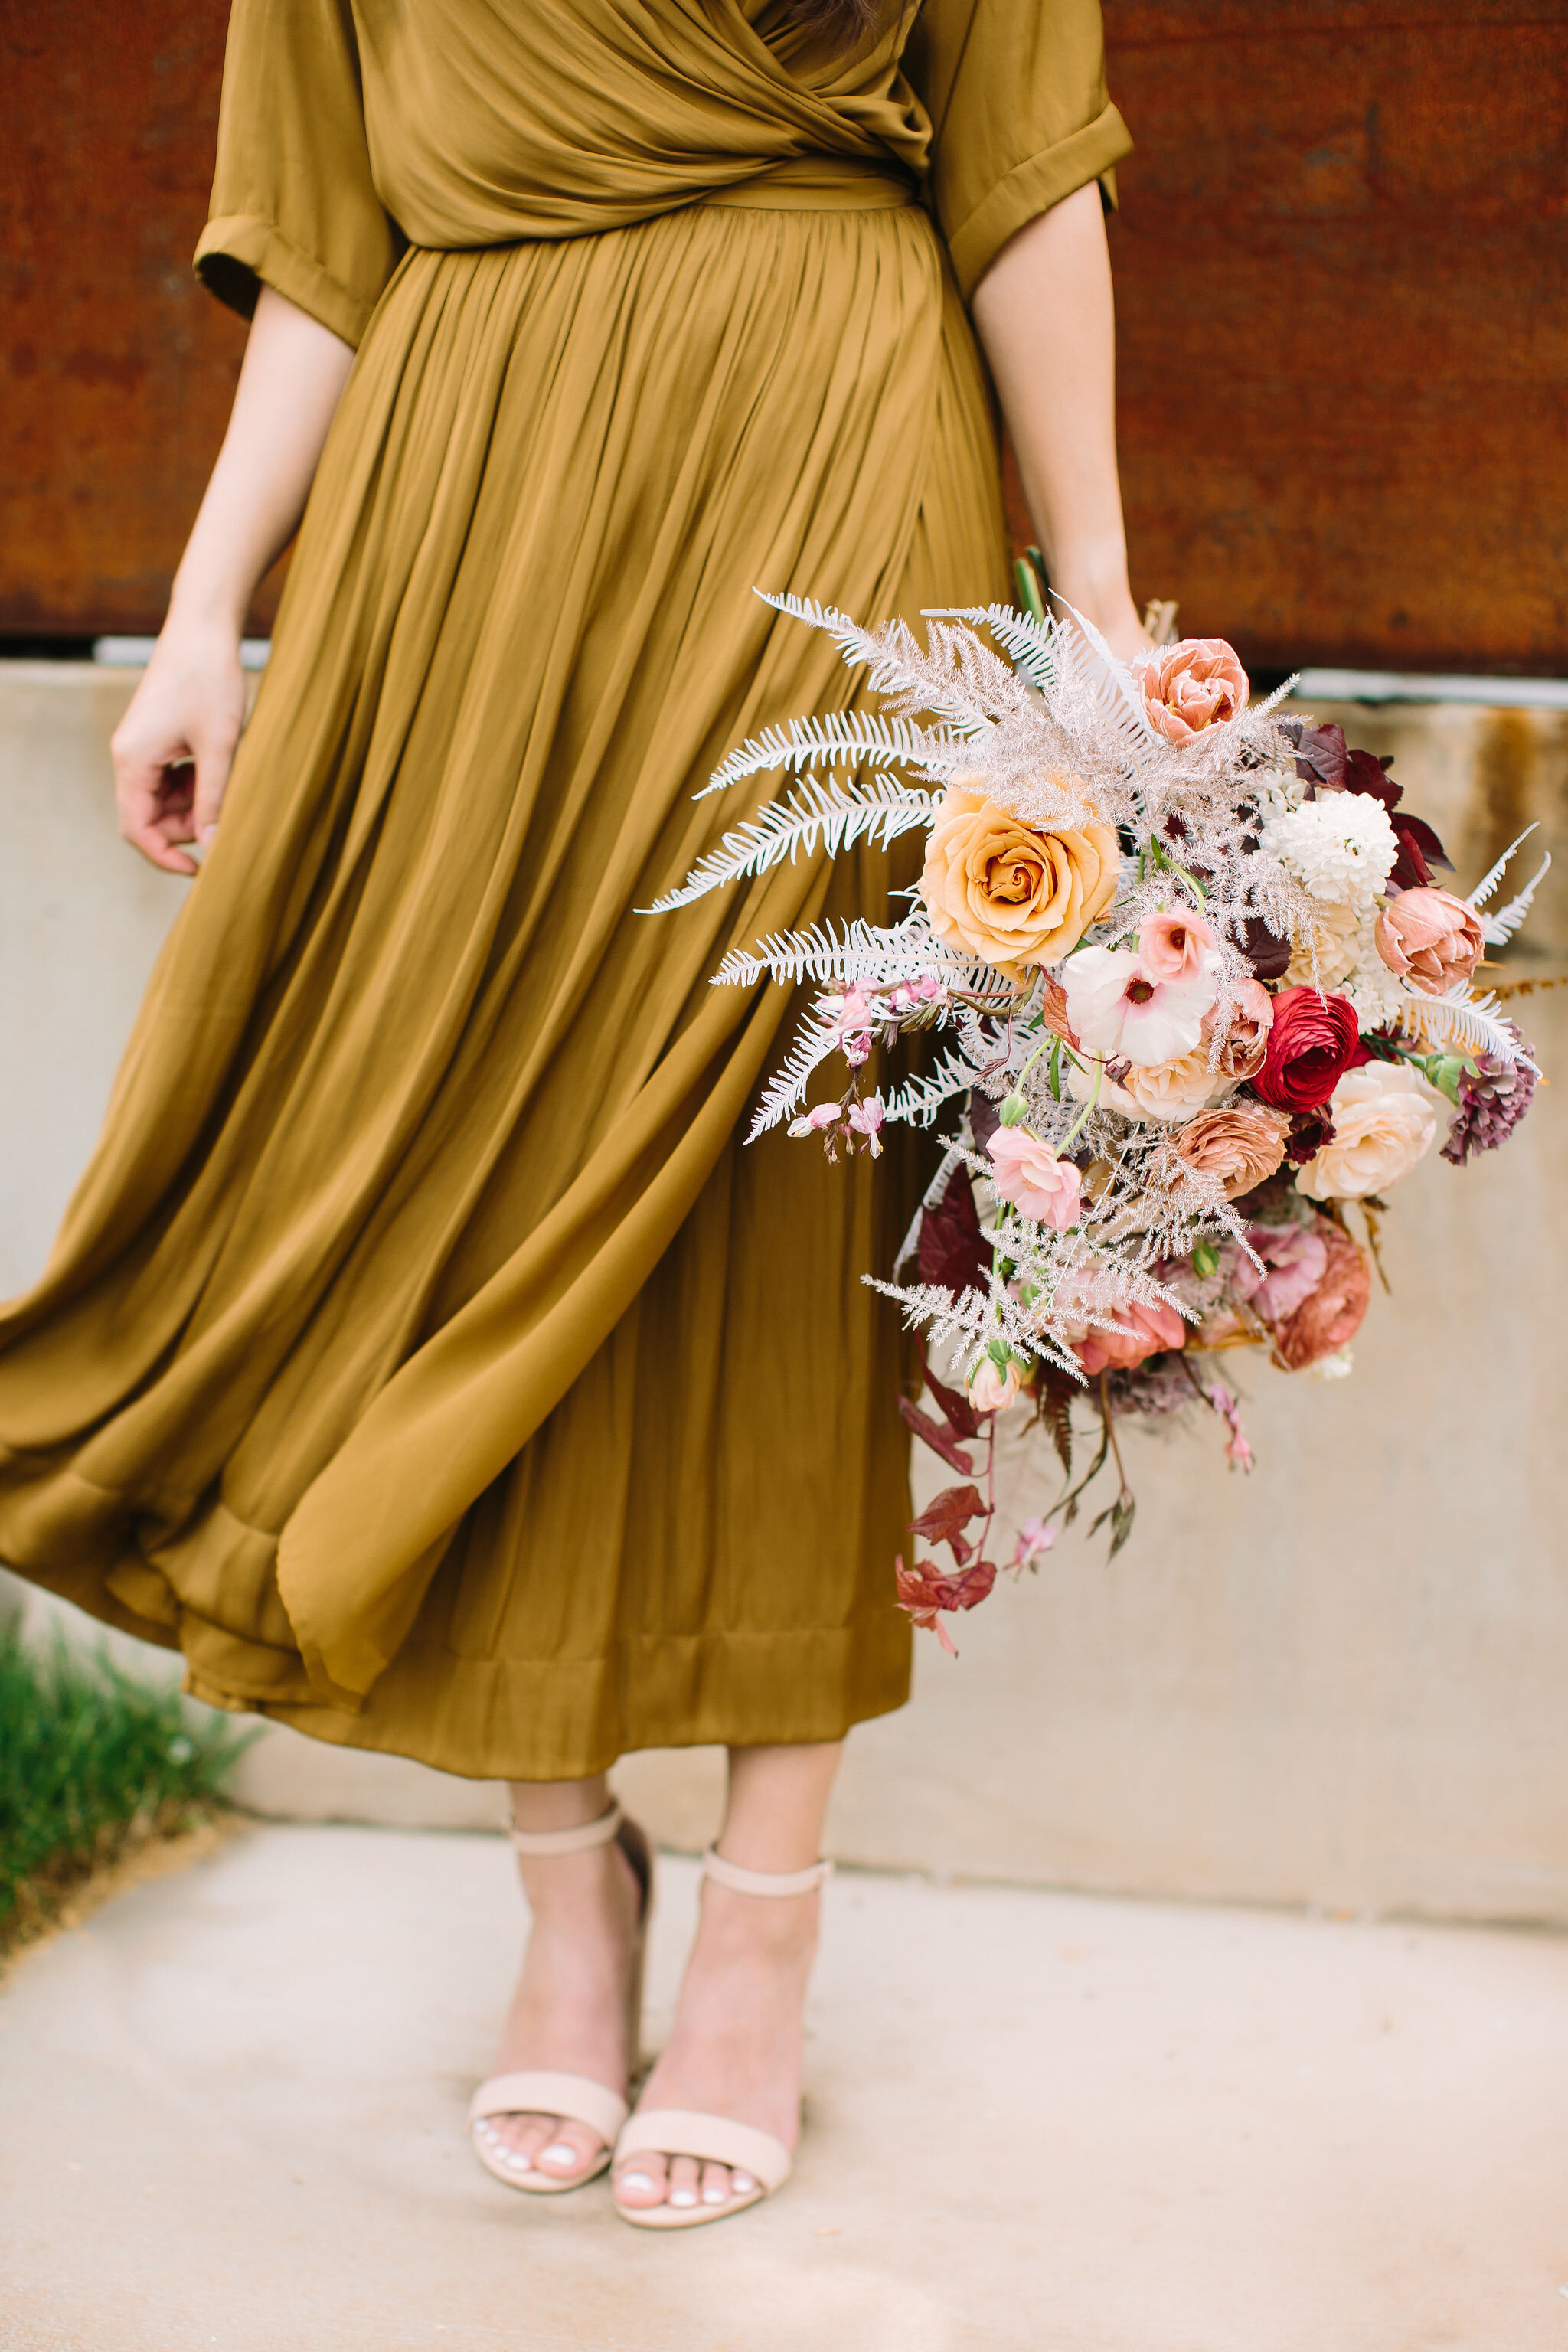 Organic, modern bouquet with dried white ferns, dusty pink ranunculus, golden brown ferns, spirea, bleeding hearts, and other dainty spring flowers. Nashville wedding and event floral design by Rosemary & Finch at 14Tenn. Chartreuse dress!